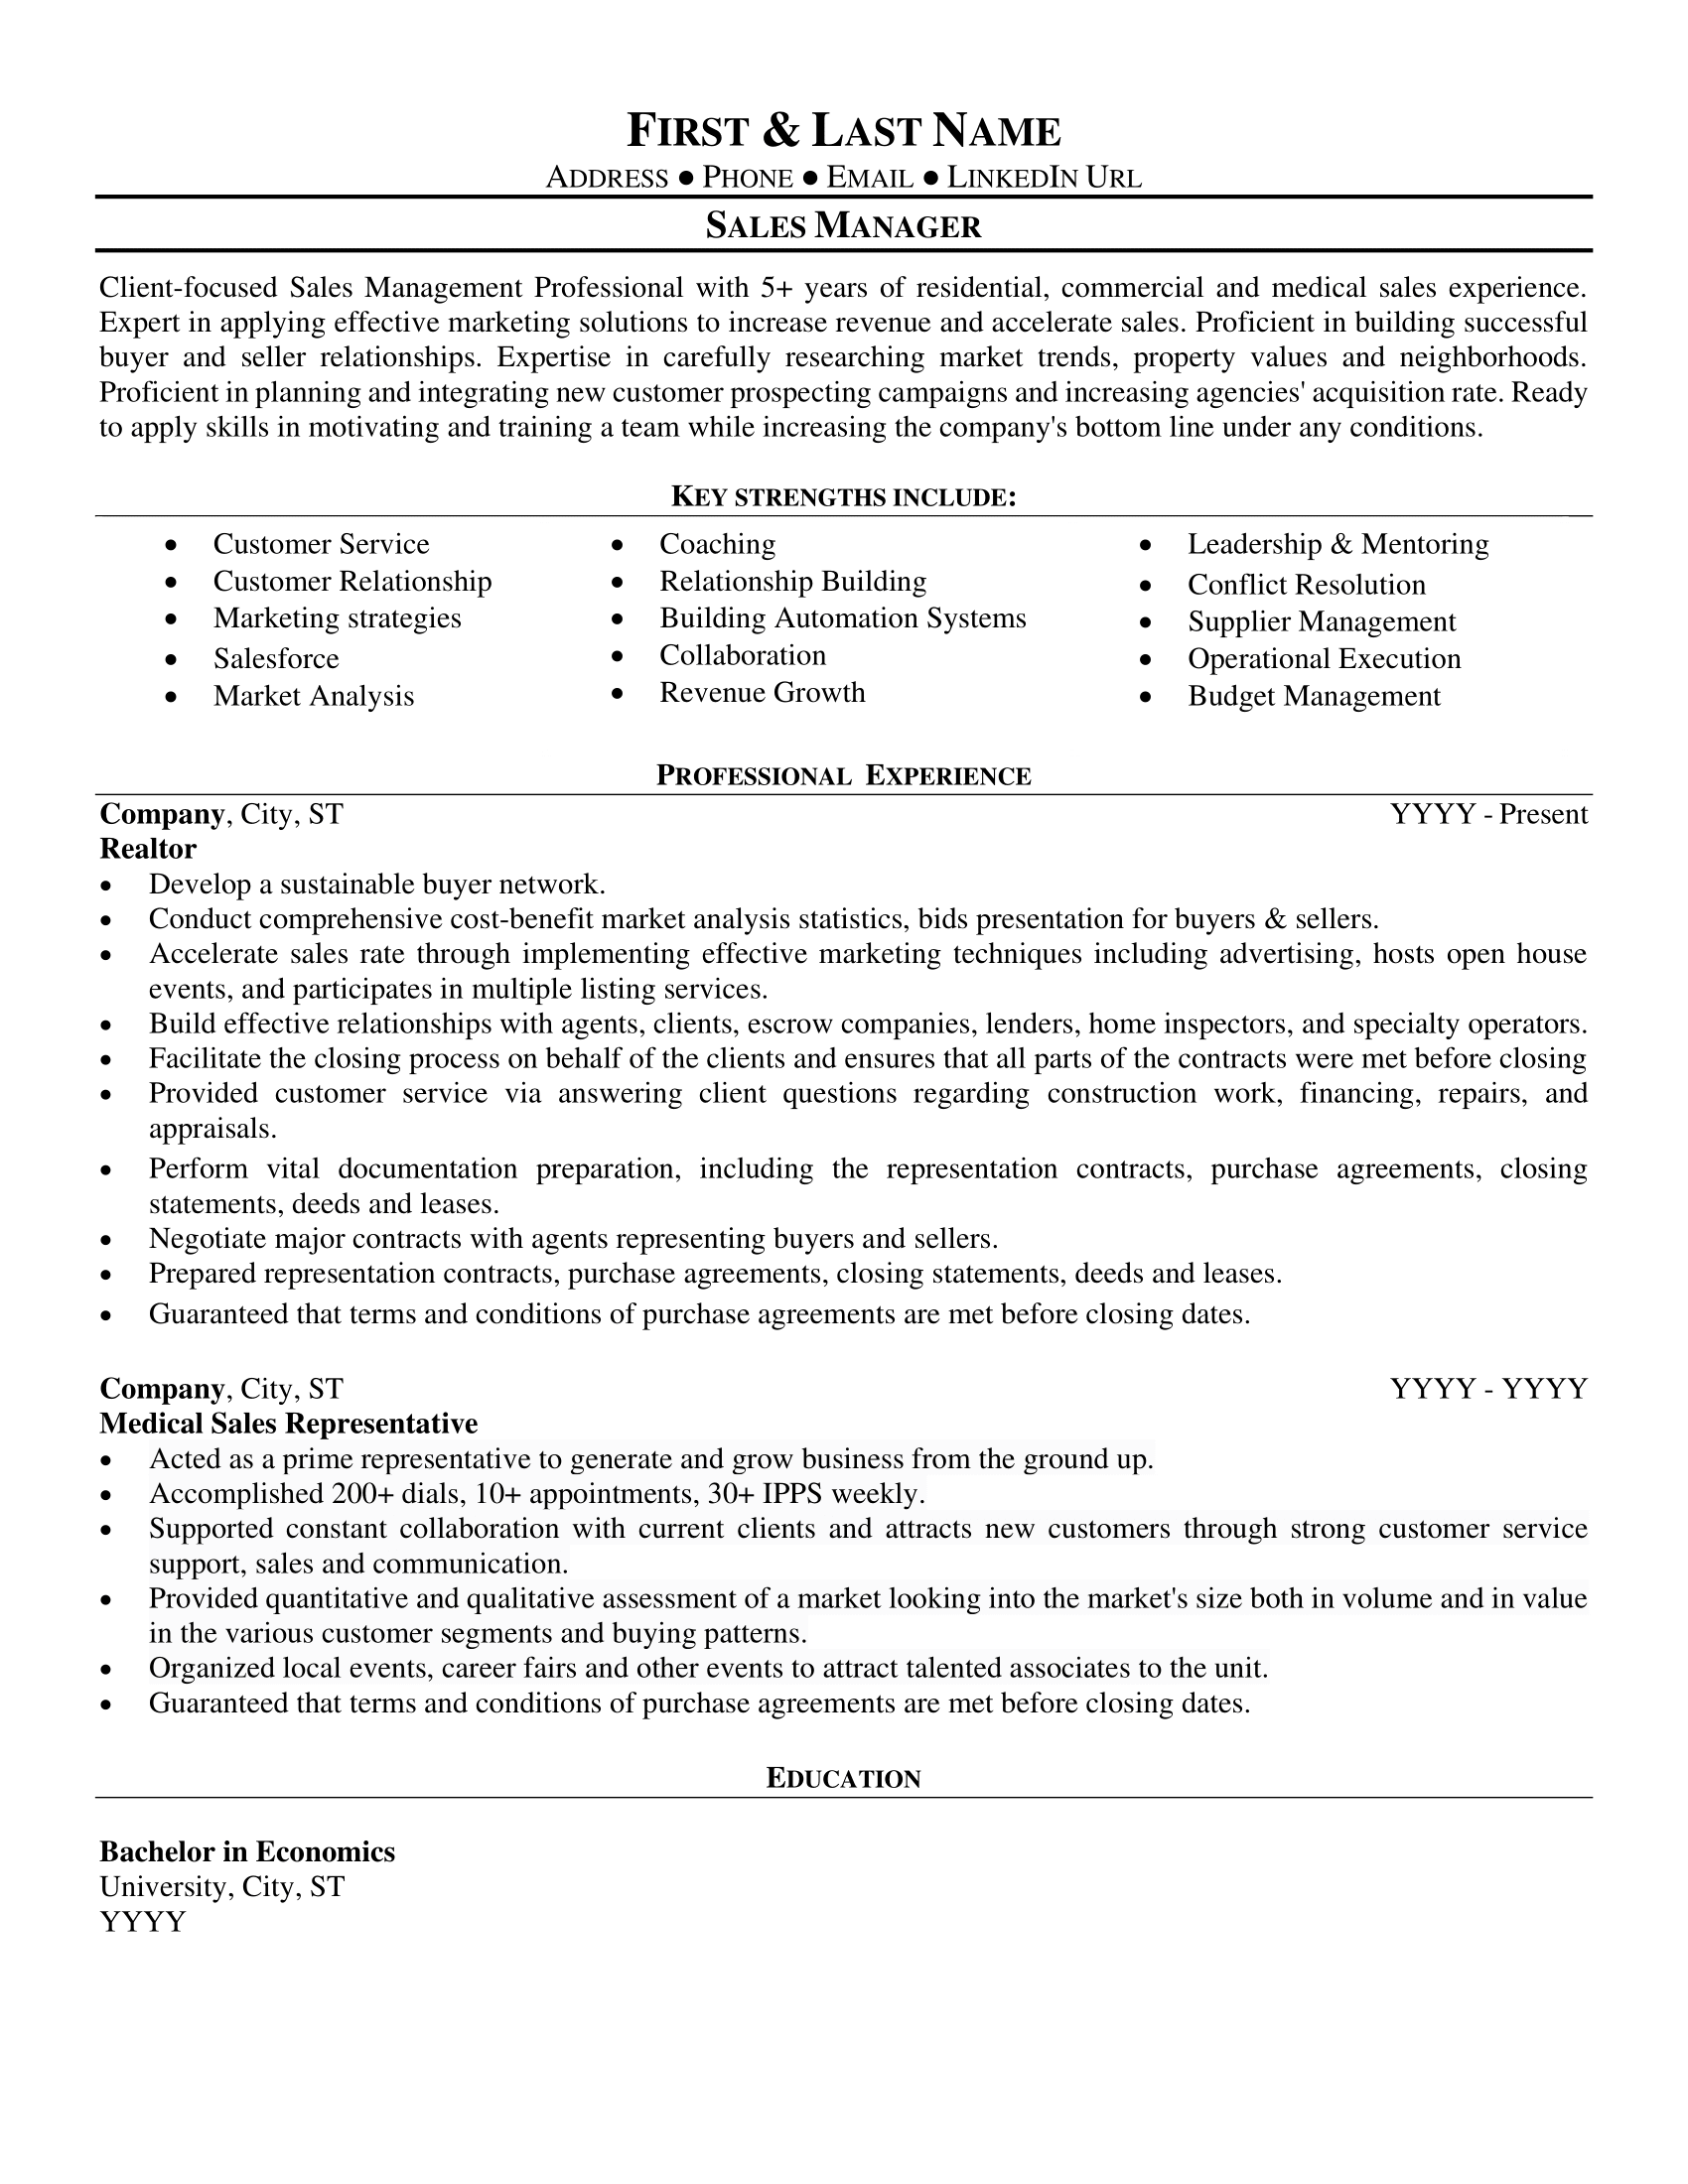 Sales Manager Resume Sample | Example & Writing Guide